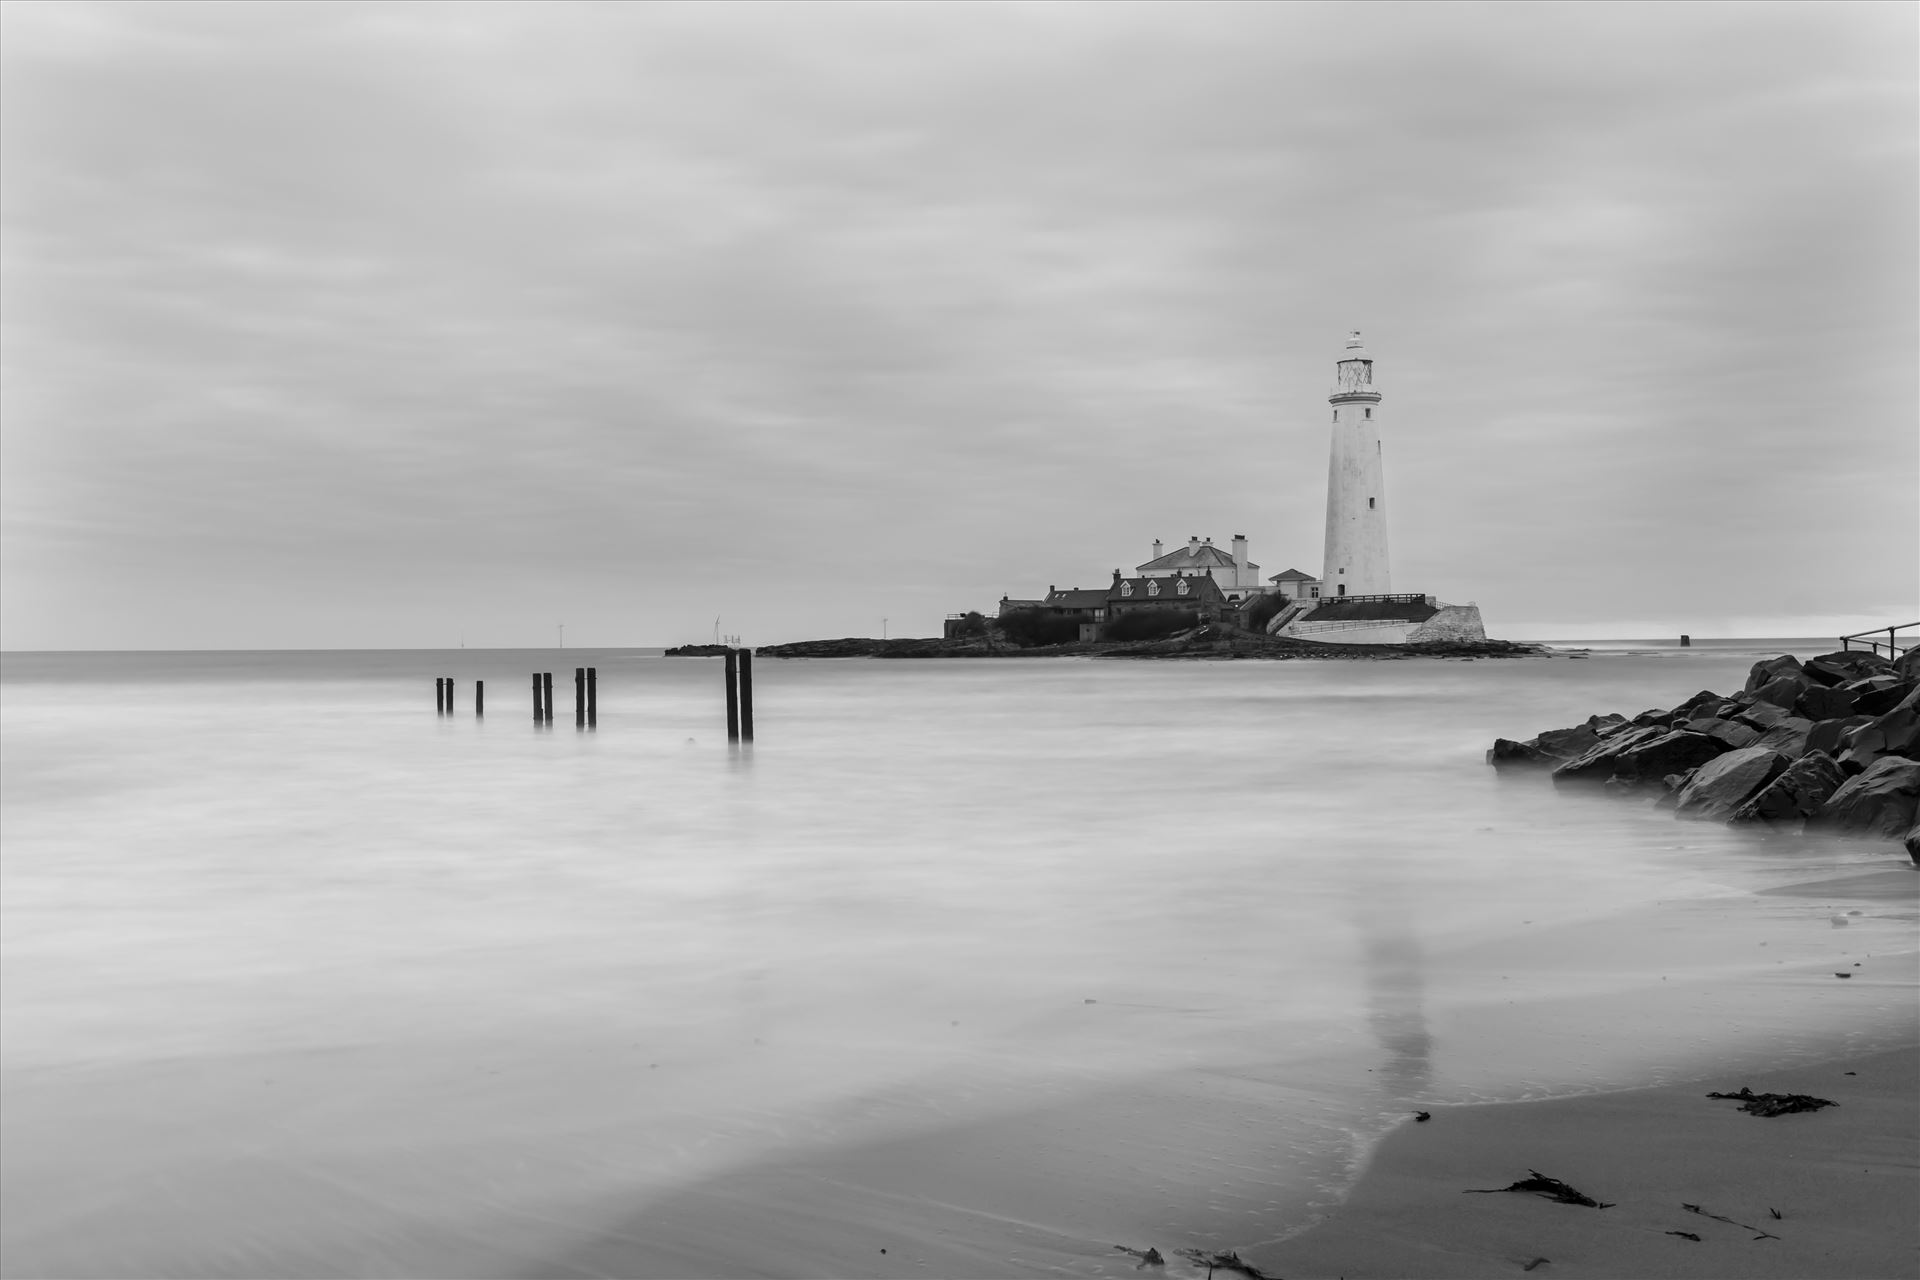 St Mary`s lighthouse, Whitley Bay (B&W) - St Mary`s lighthouse stands on a small rocky tidal island is linked to the mainland by a short concrete causeway which is submerged at high tide. The lighthouse was built in 1898 & was decommissioned in 1984, 2 years after becoming automatic. by philreay